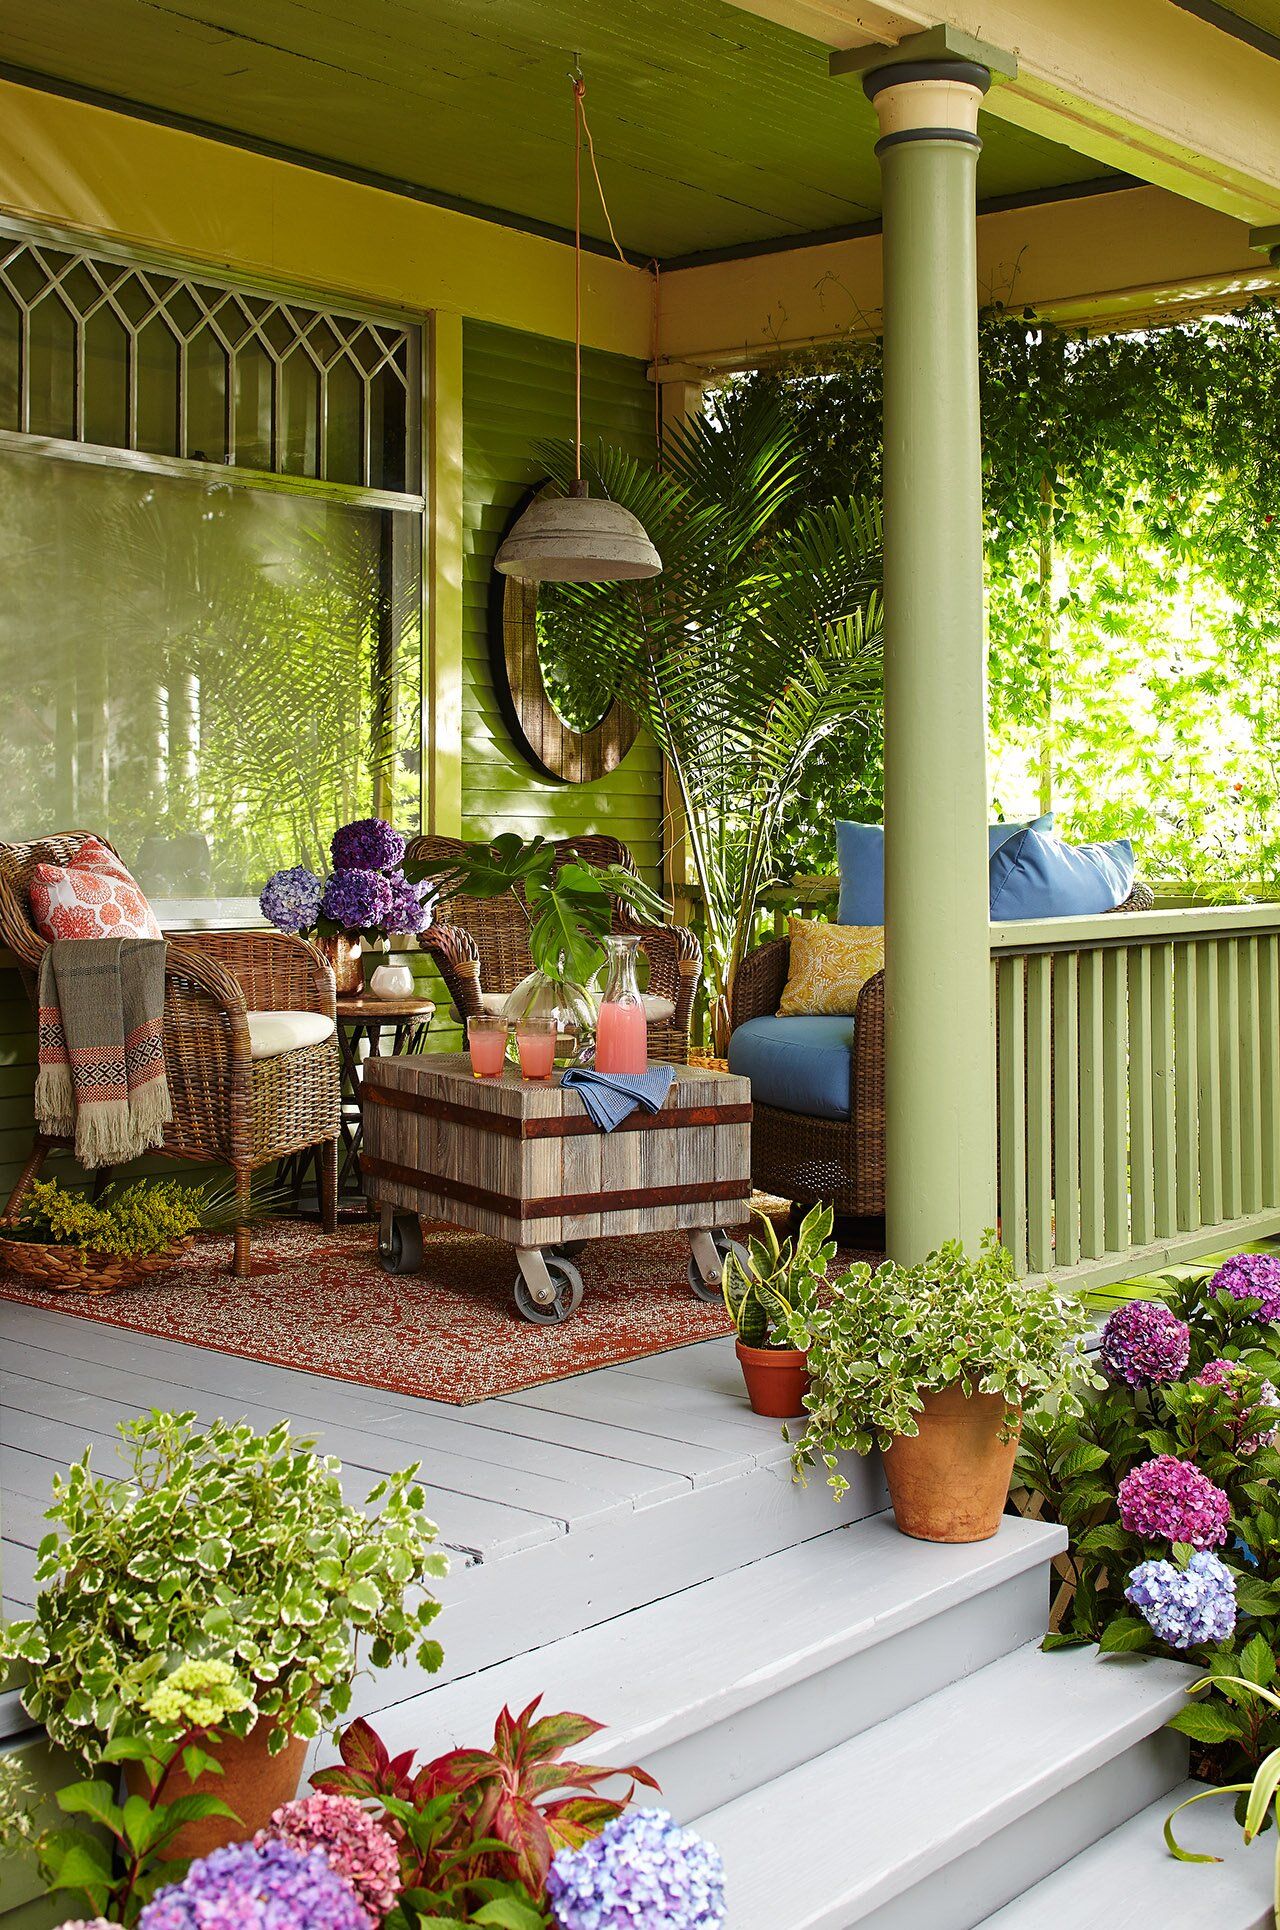 Green Porch Design : Creating a Fresh and Inviting Green Porch Design for Your Home